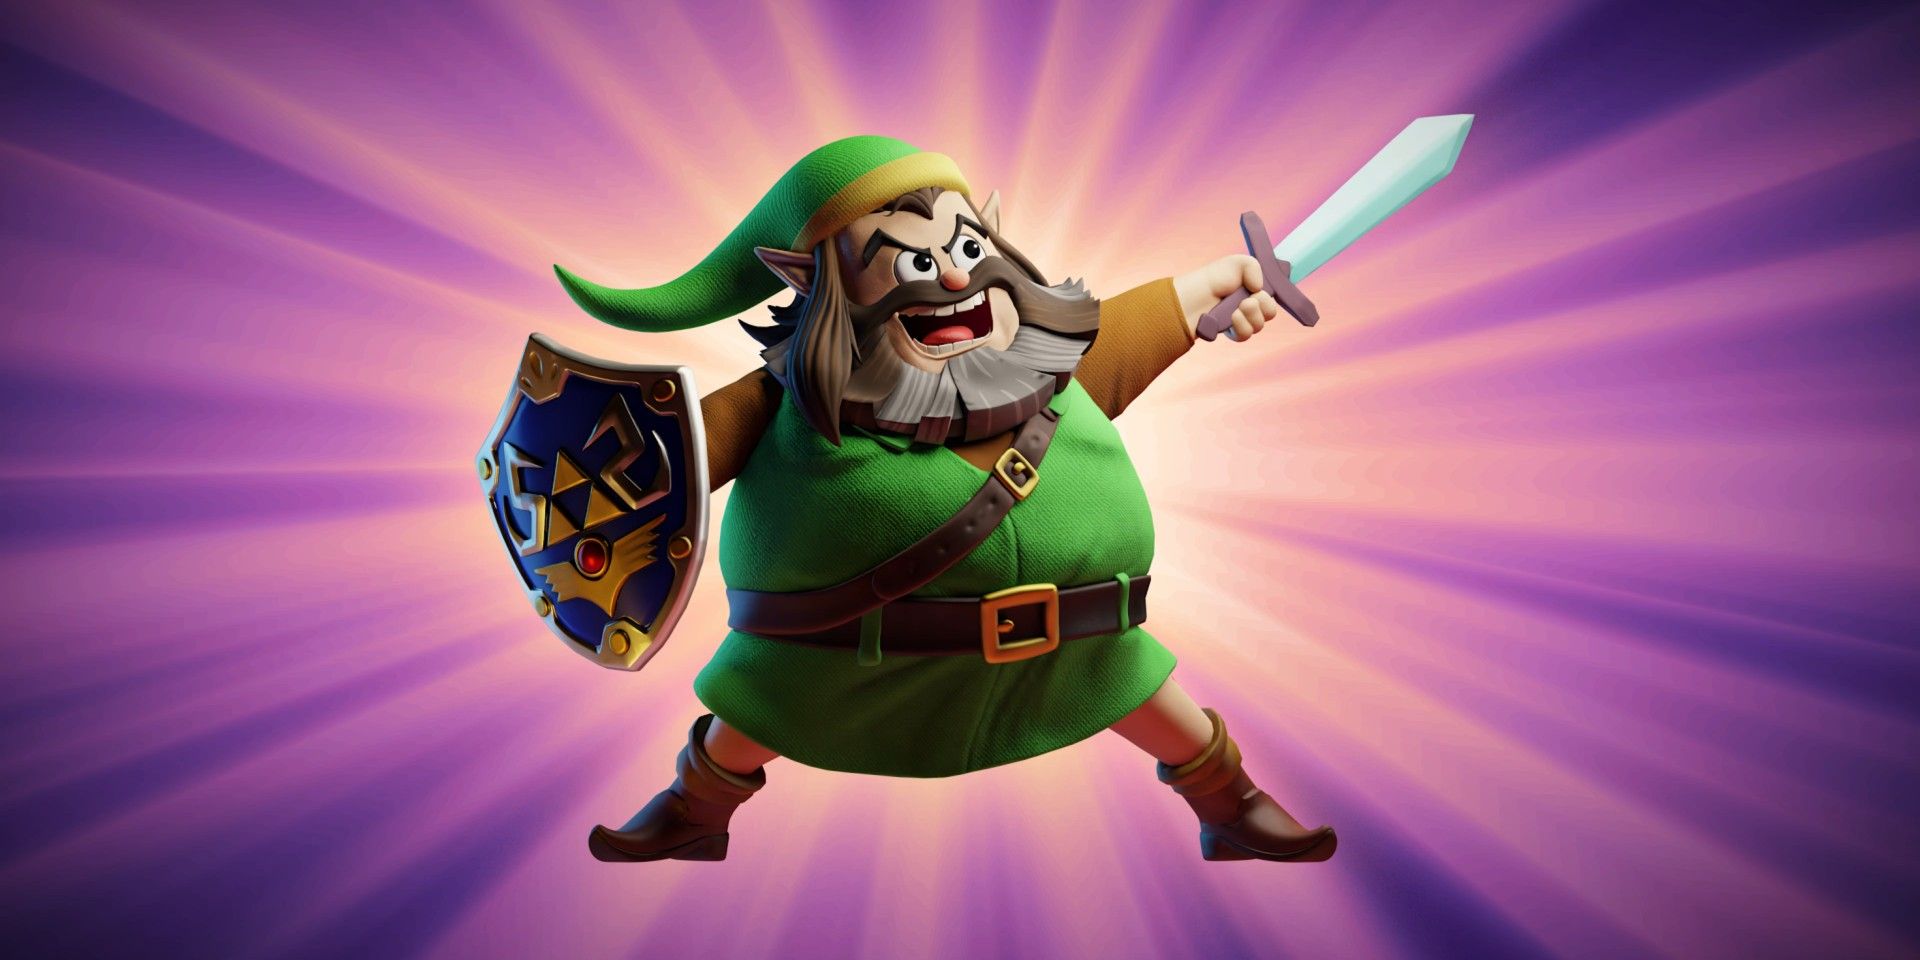 A screenshot from Tenacious D's Video Games song, featuring an animated version of Jack Black dressed as Link, from The Legend of Zelda.